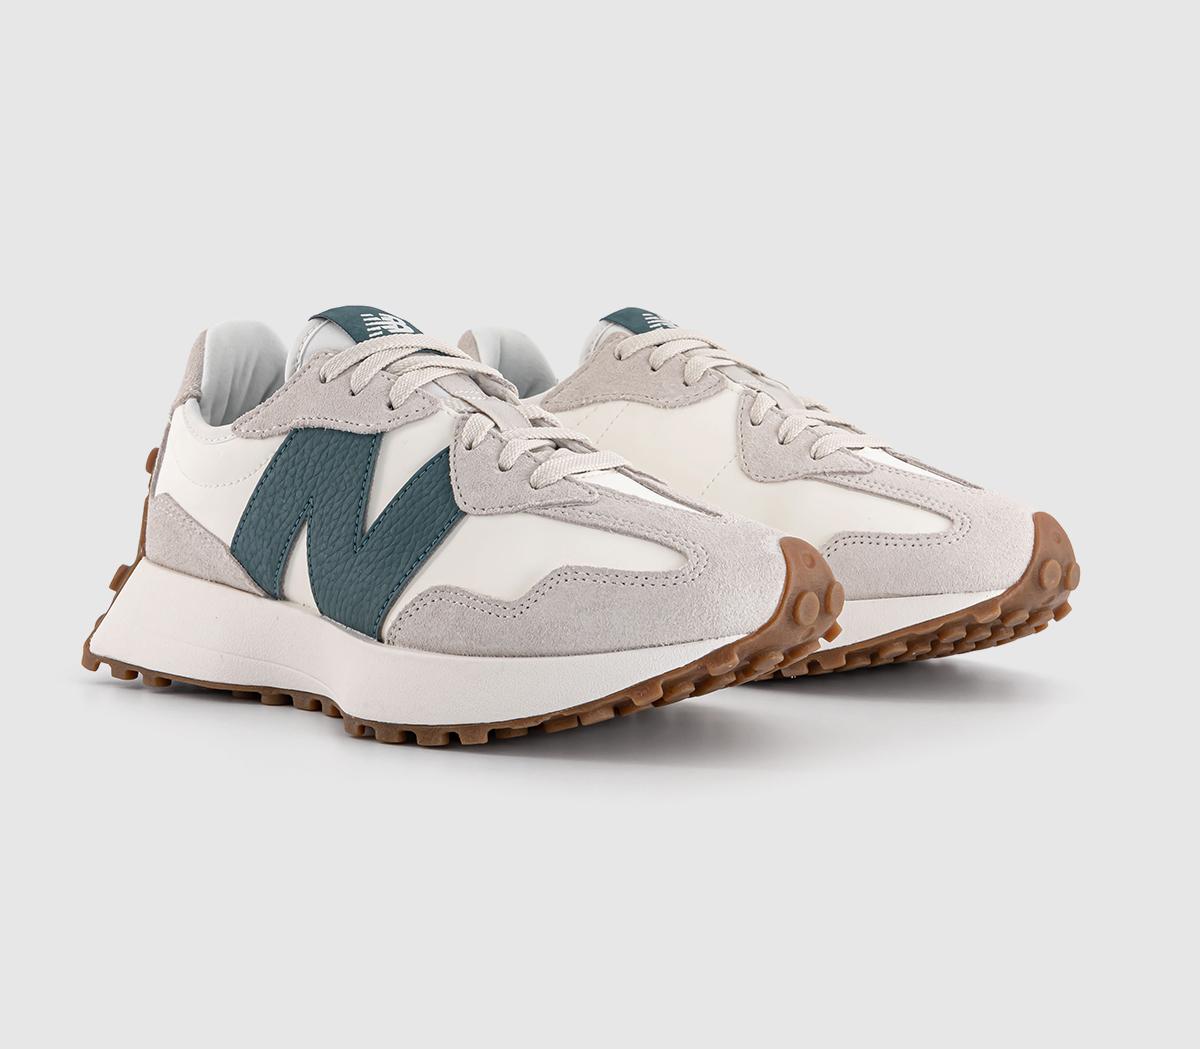 New Balance Womens 327 Trainers Spruce White, 4